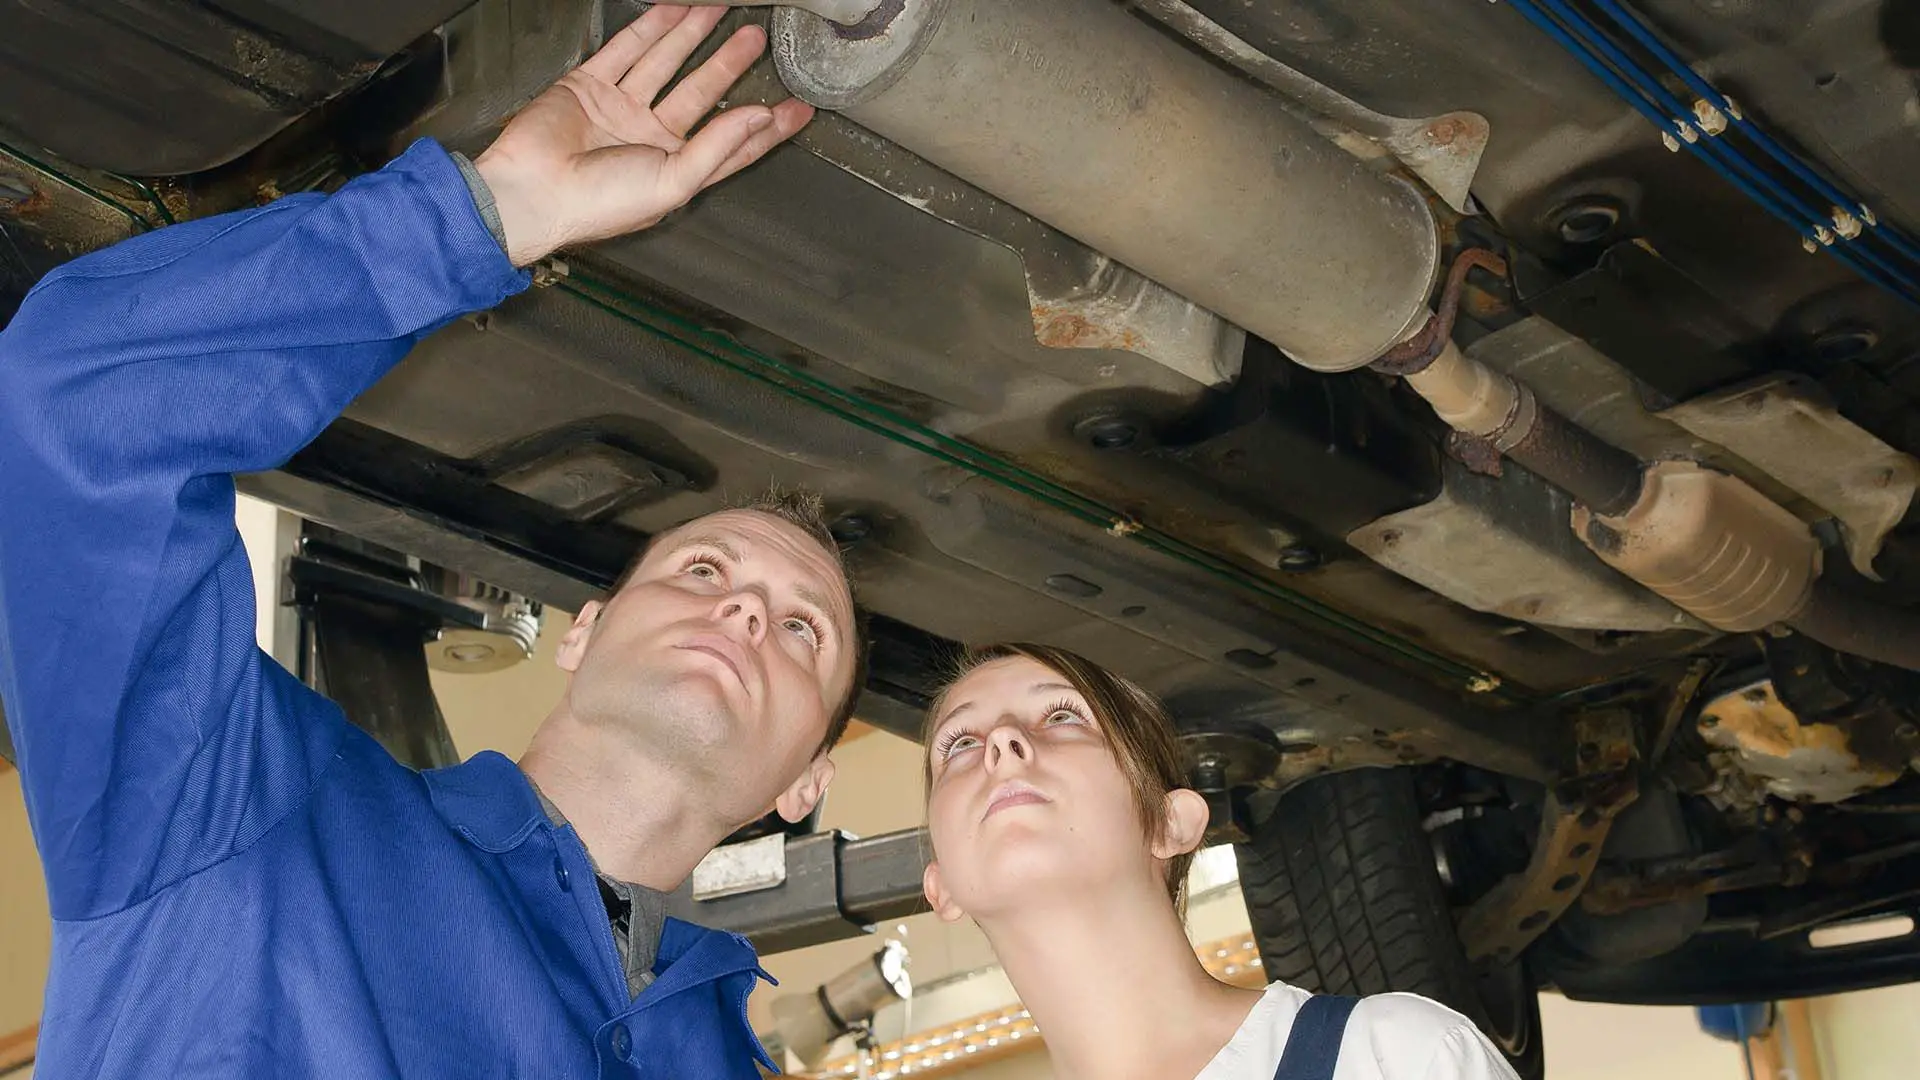 Mechanic checking a car's exhaust system